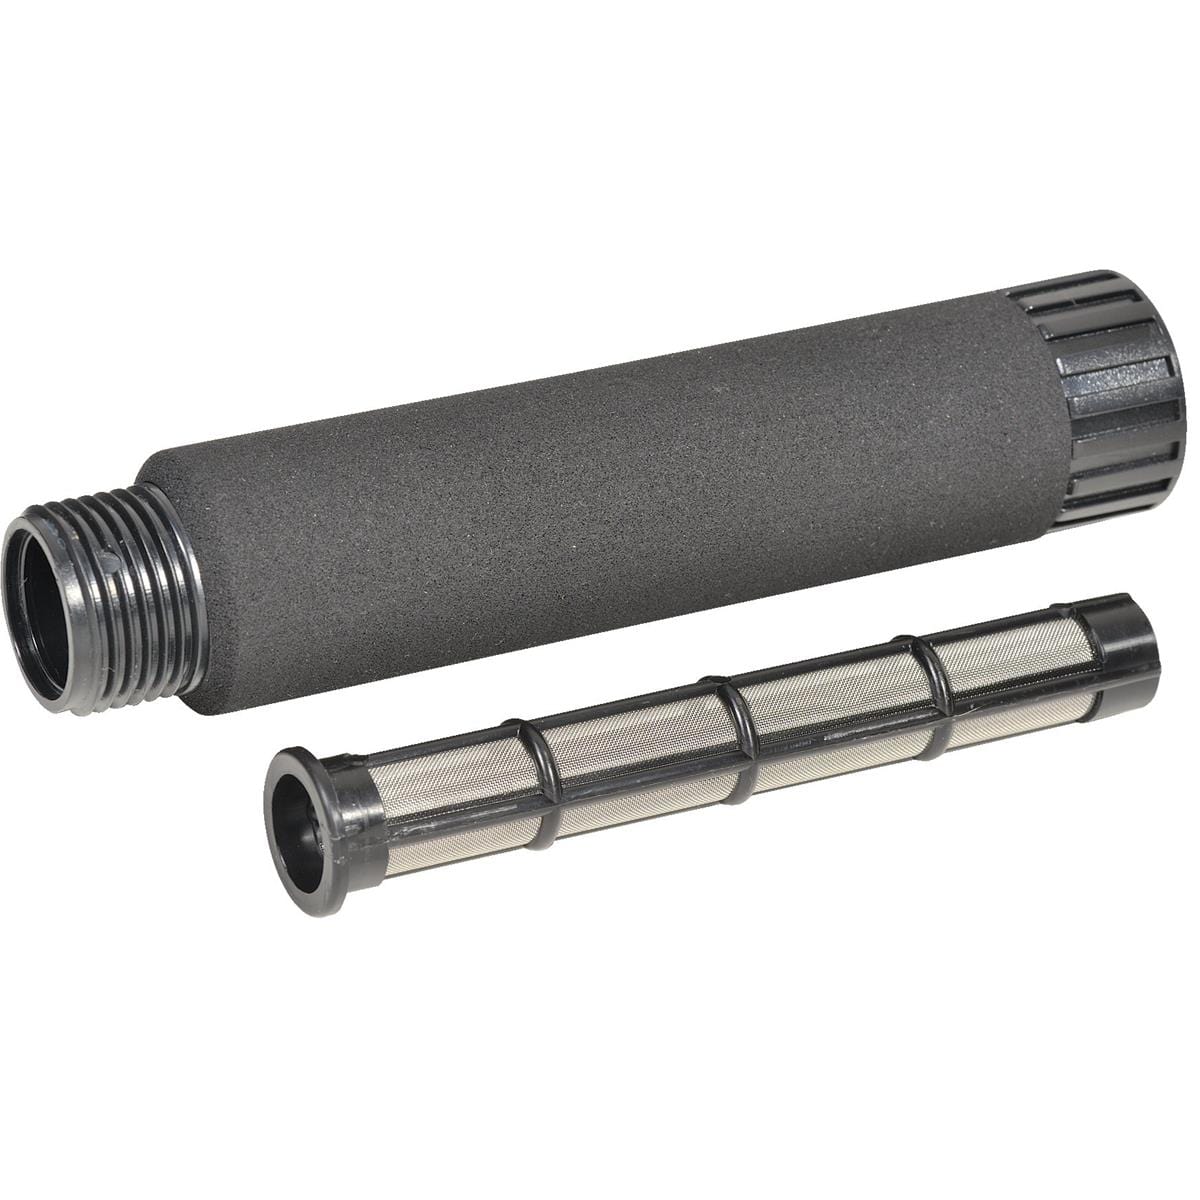 In-line Water Hose Filter